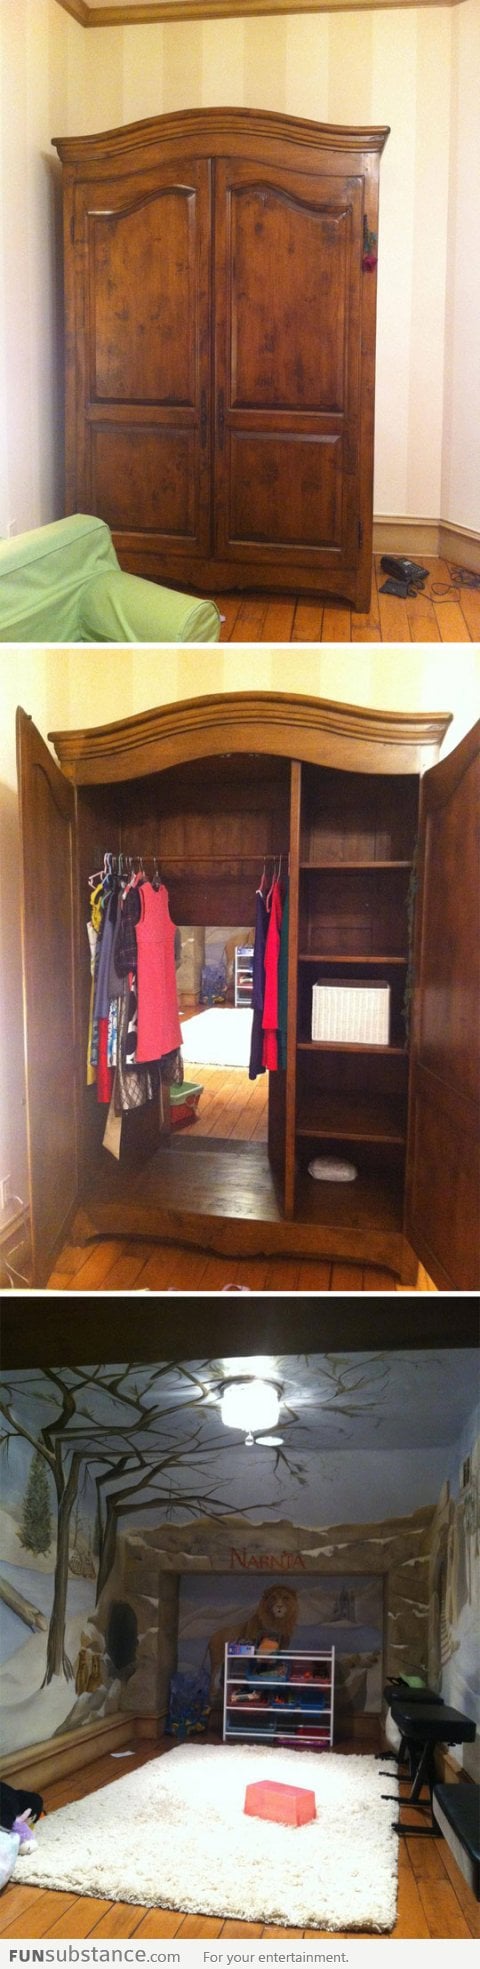 A wardrobe with an amazing surprise